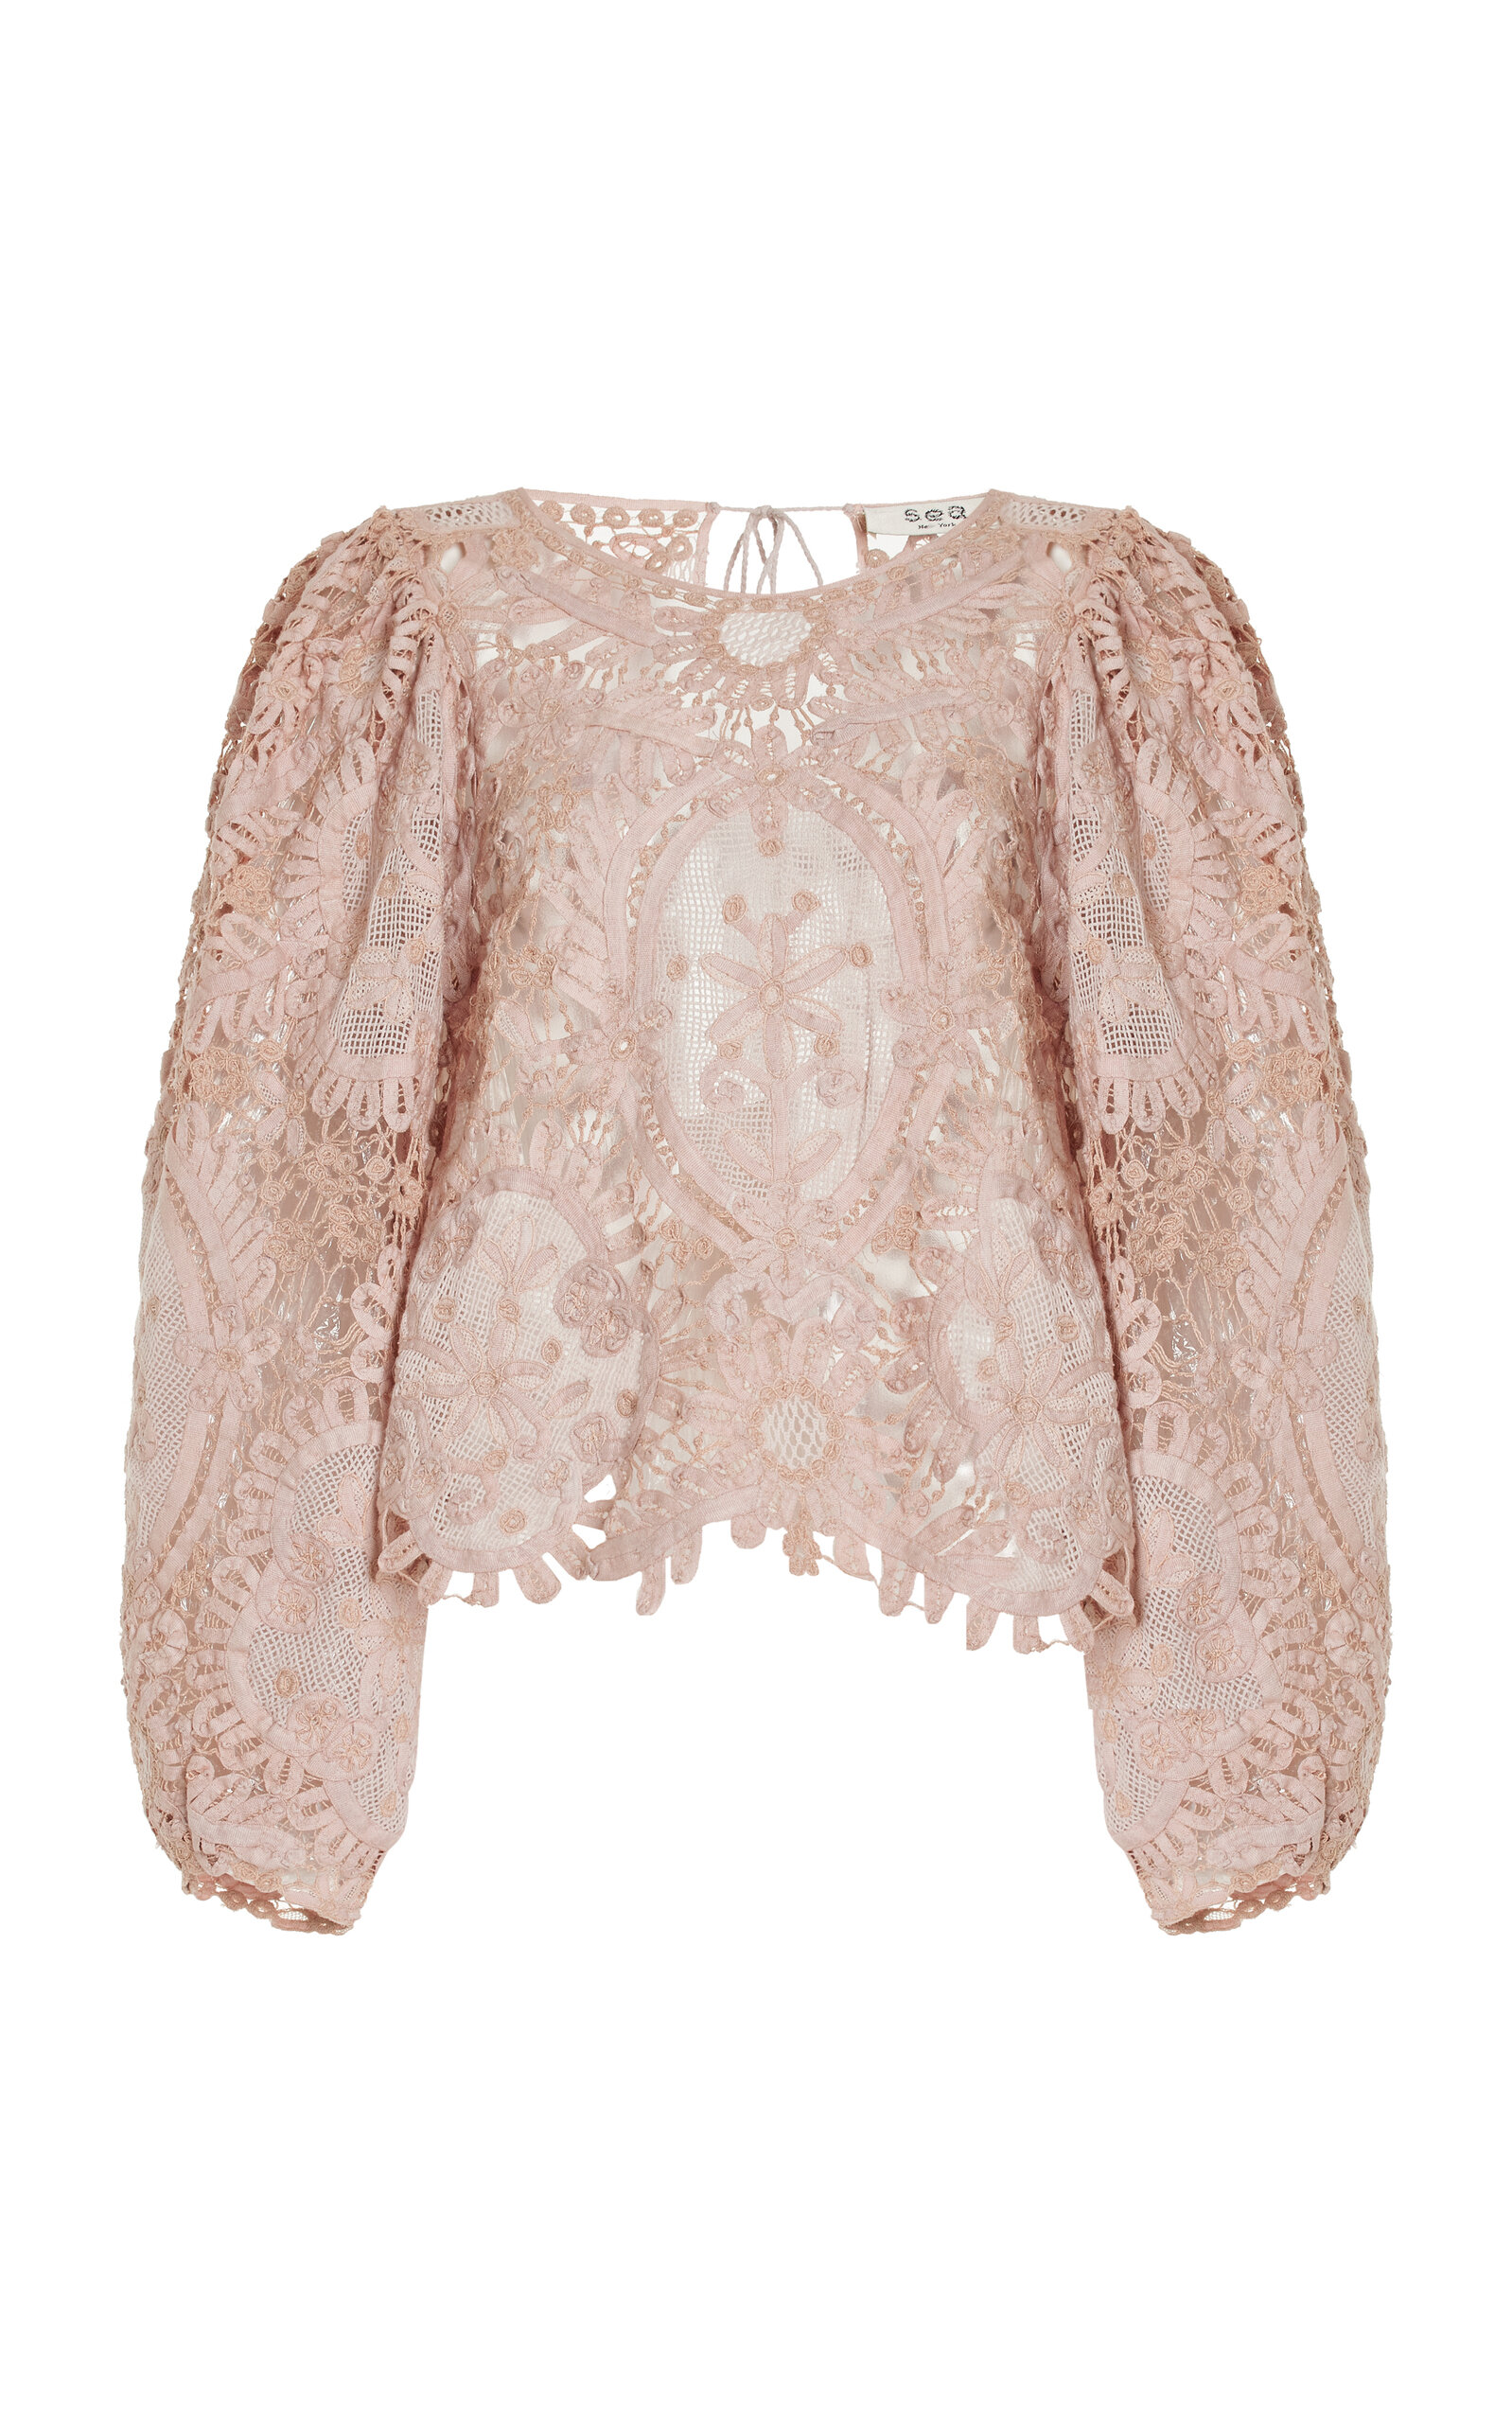 Bente Embroidery Cotton Lace Top